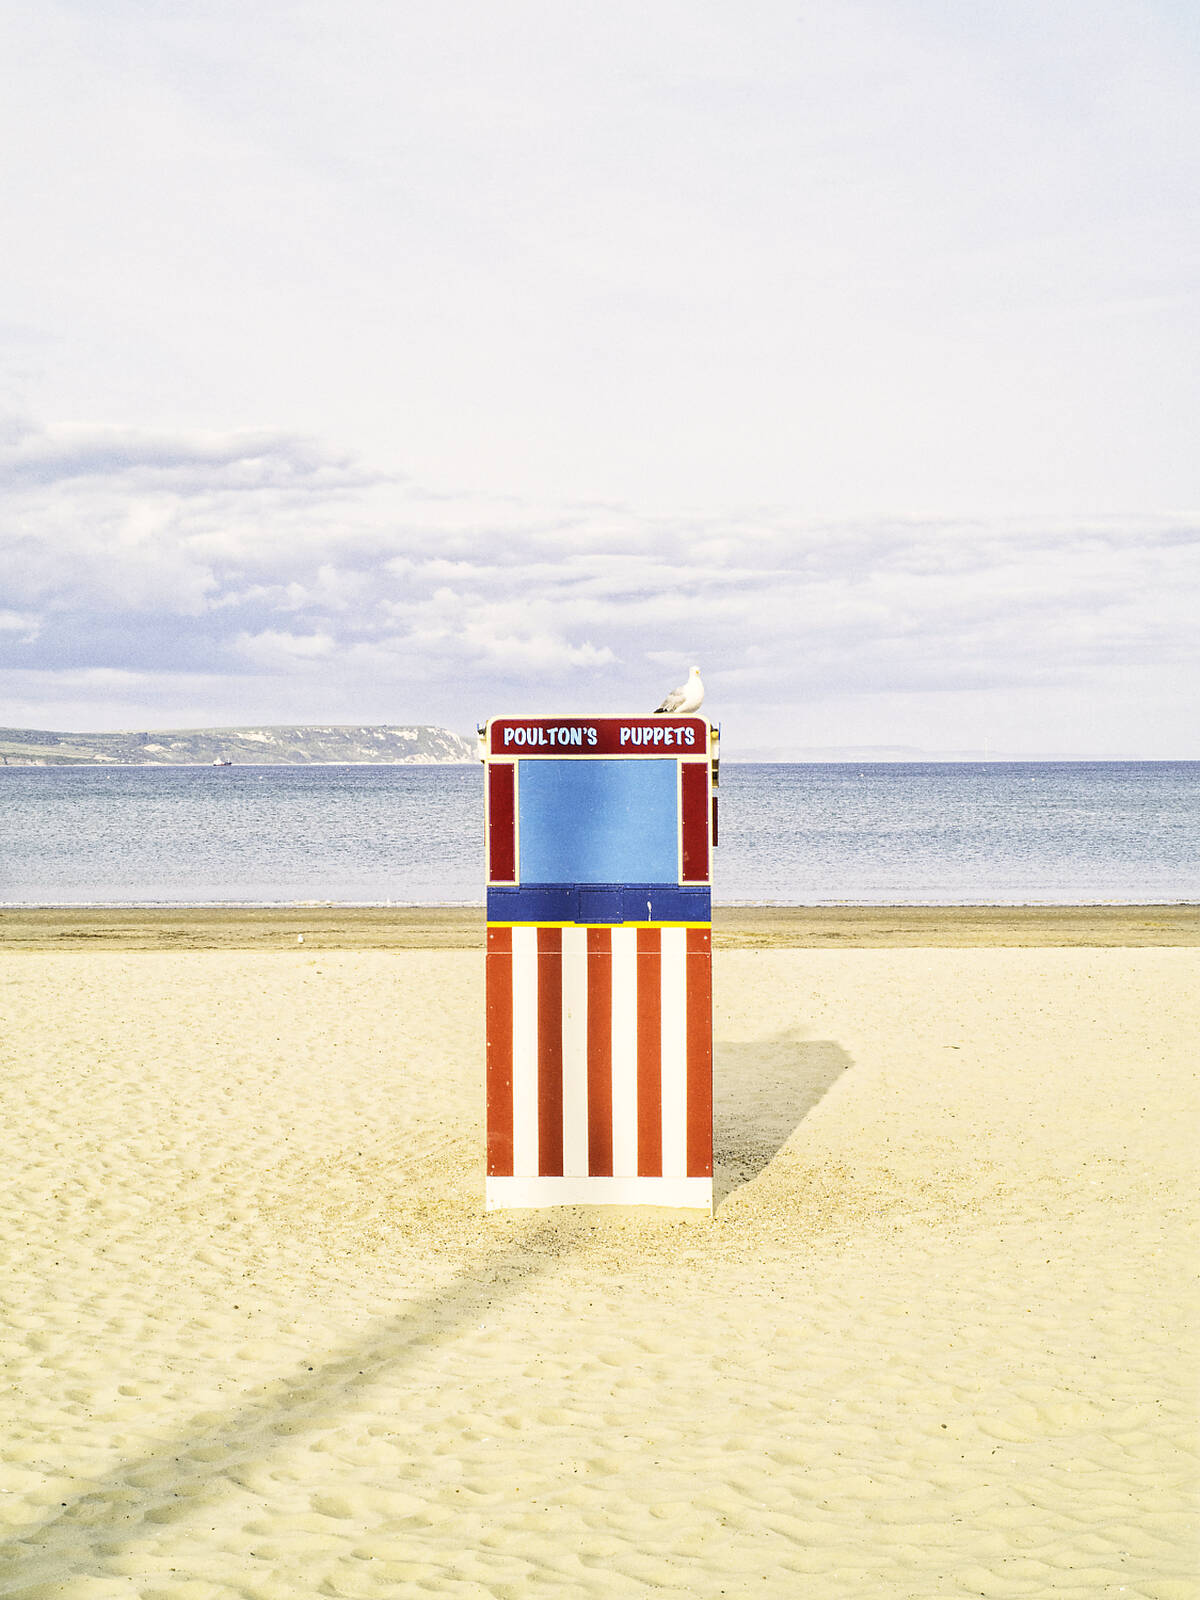 Image of Weymouth Beach by John Grindle